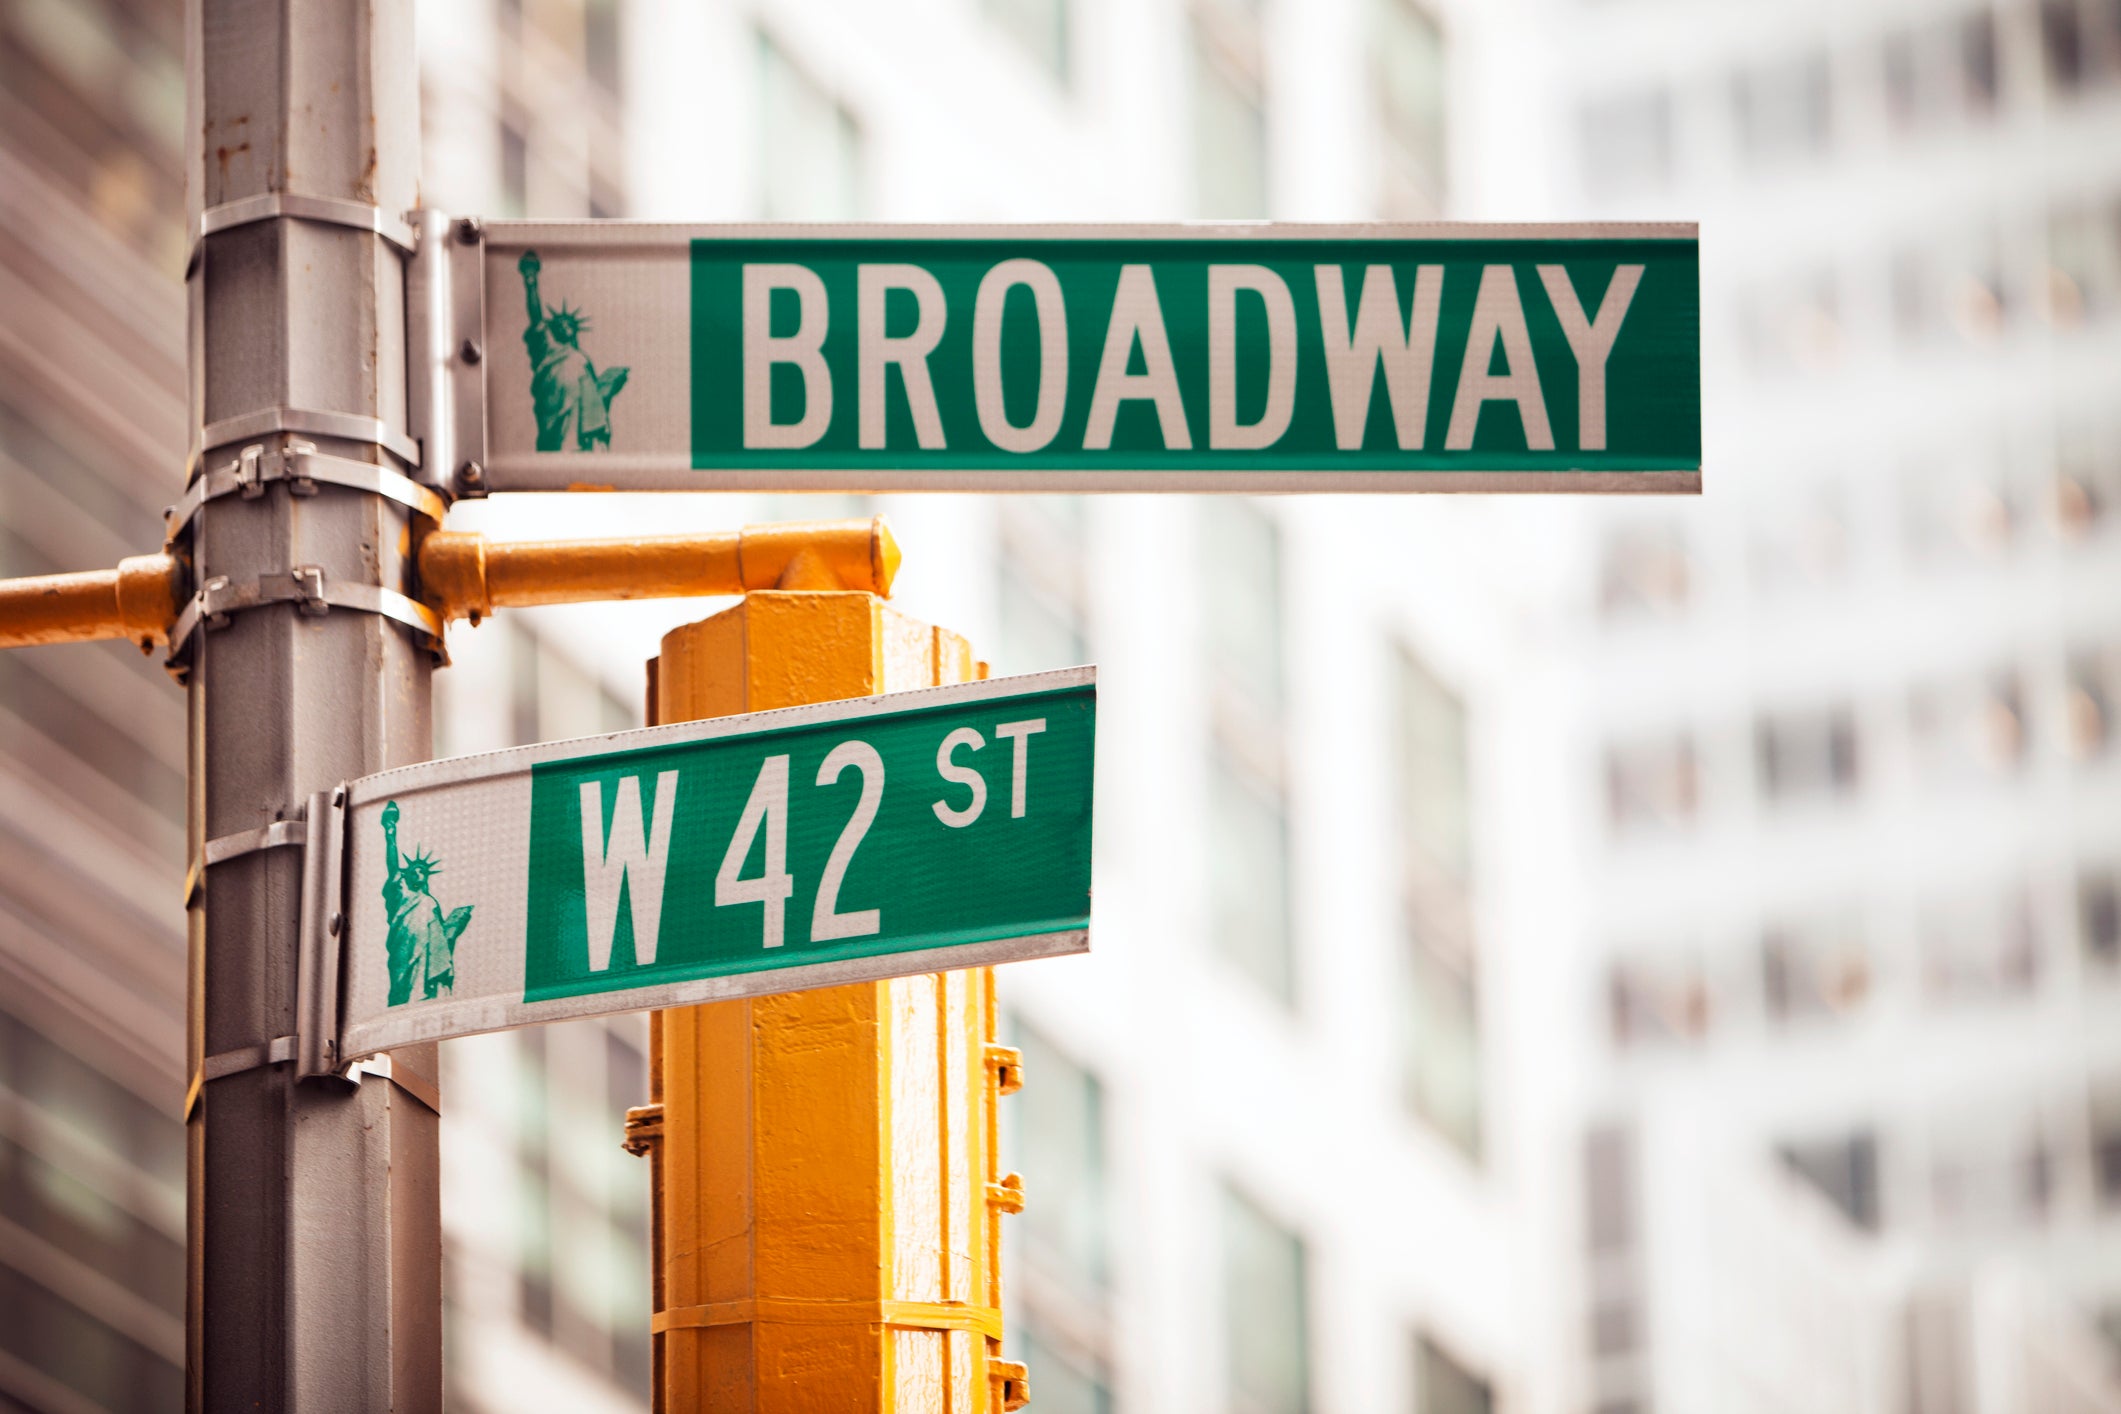 On with the show! How to get a great deal on Broadway tickets